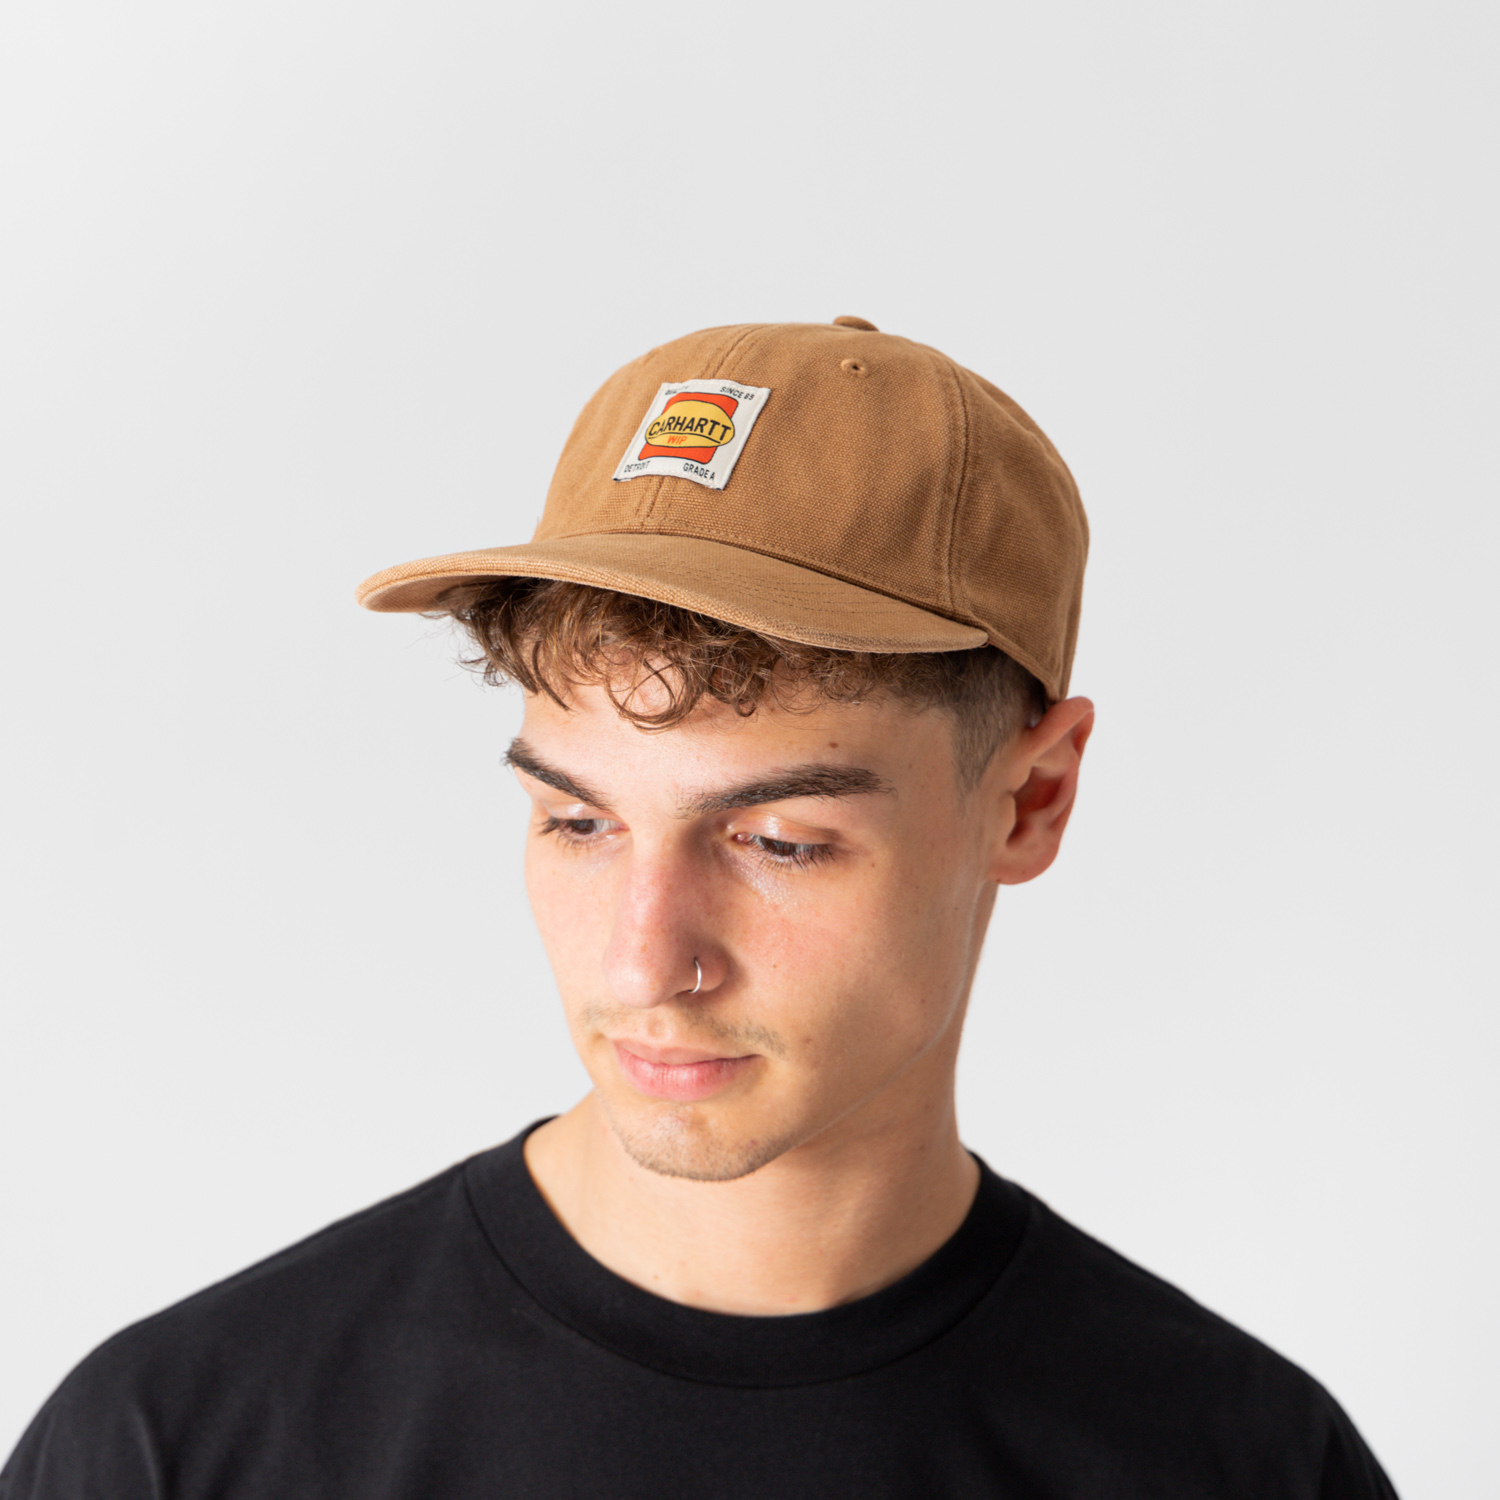 Carhartt WIP online at SNIPES